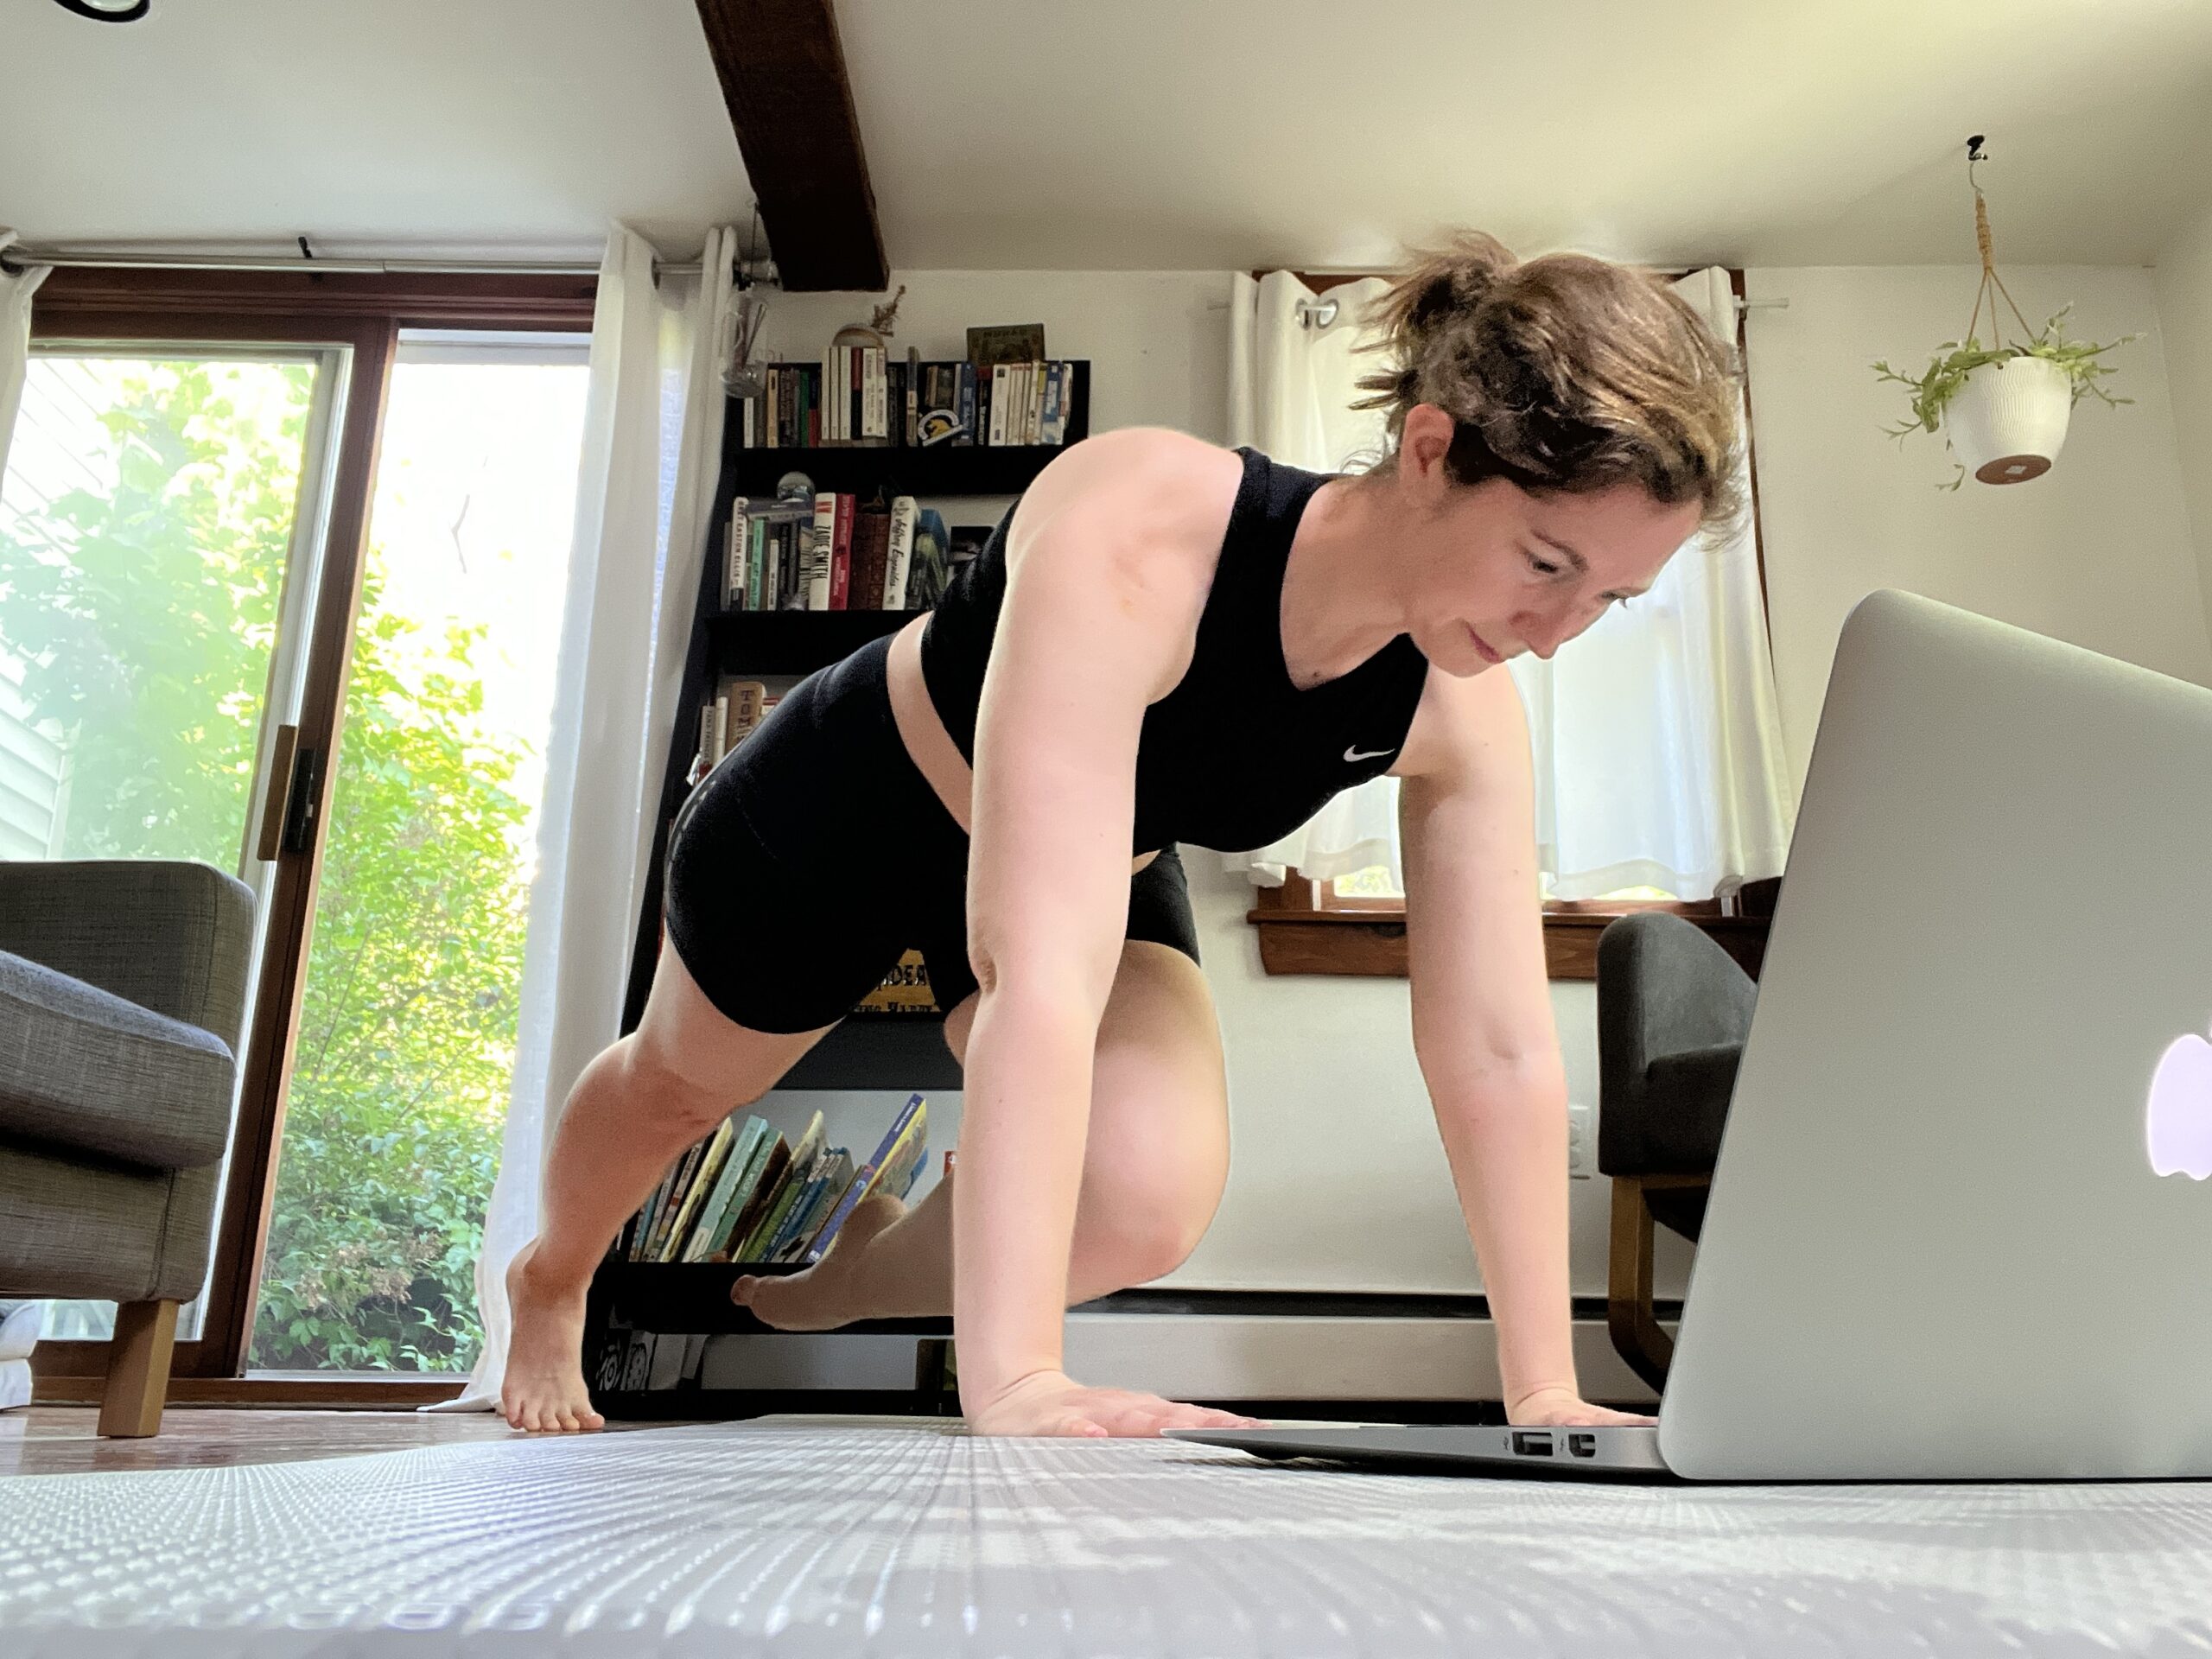 Heimlich, wearing a black sports bra and bike shorts, is seen in her living room with her laptop on the floor in front of her. She looks at the screen as she executes a modified plank position, with her left leg raised in a parallel passé.